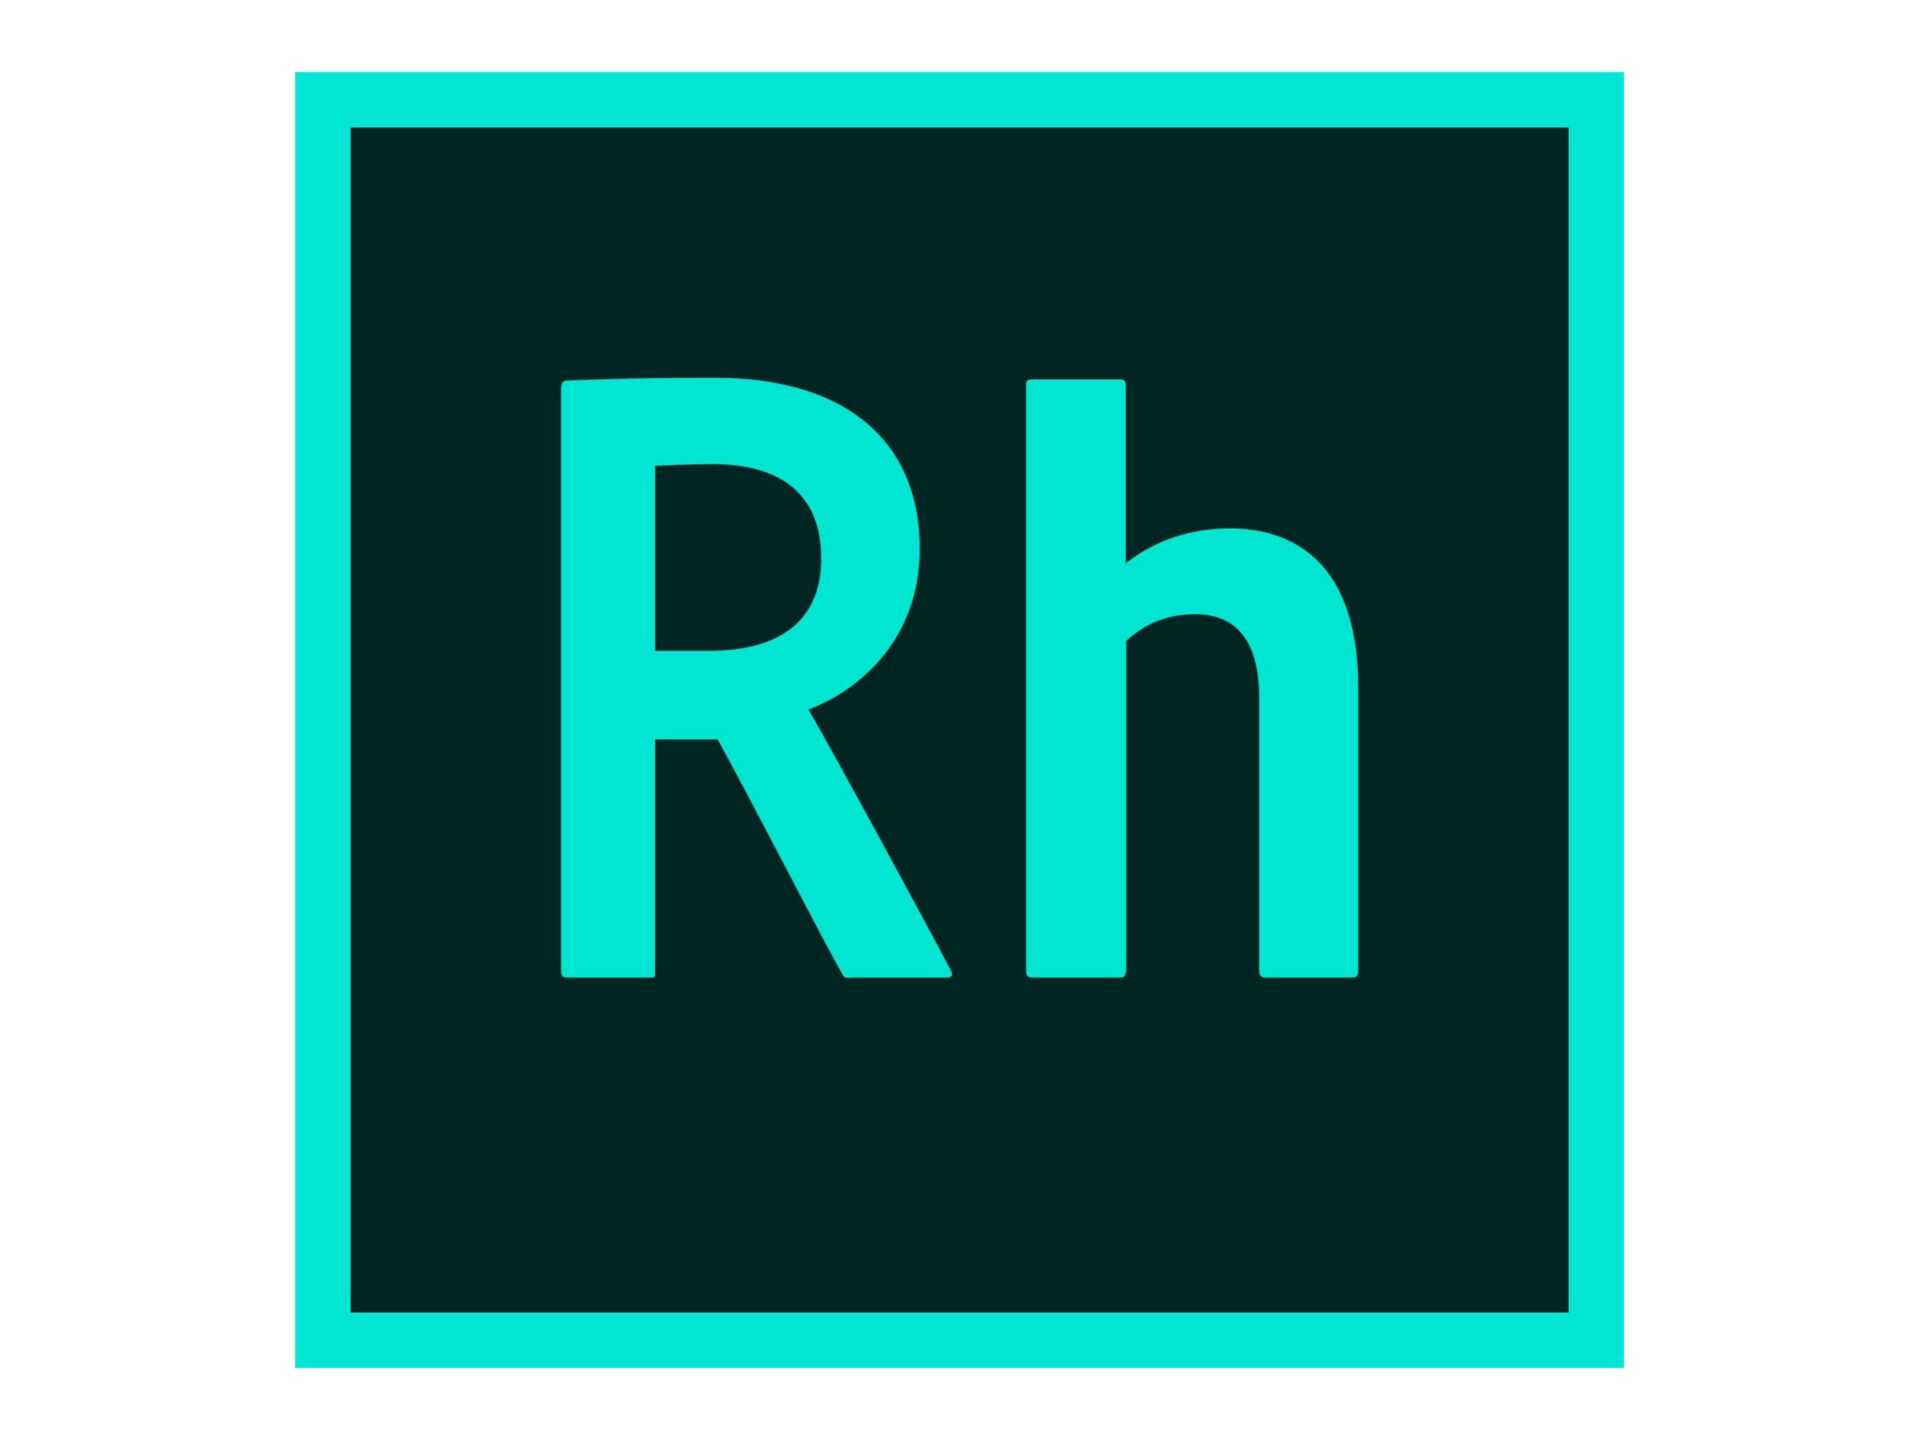 Adobe Robohelp for teams - Subscription New (6 months) - 1 user